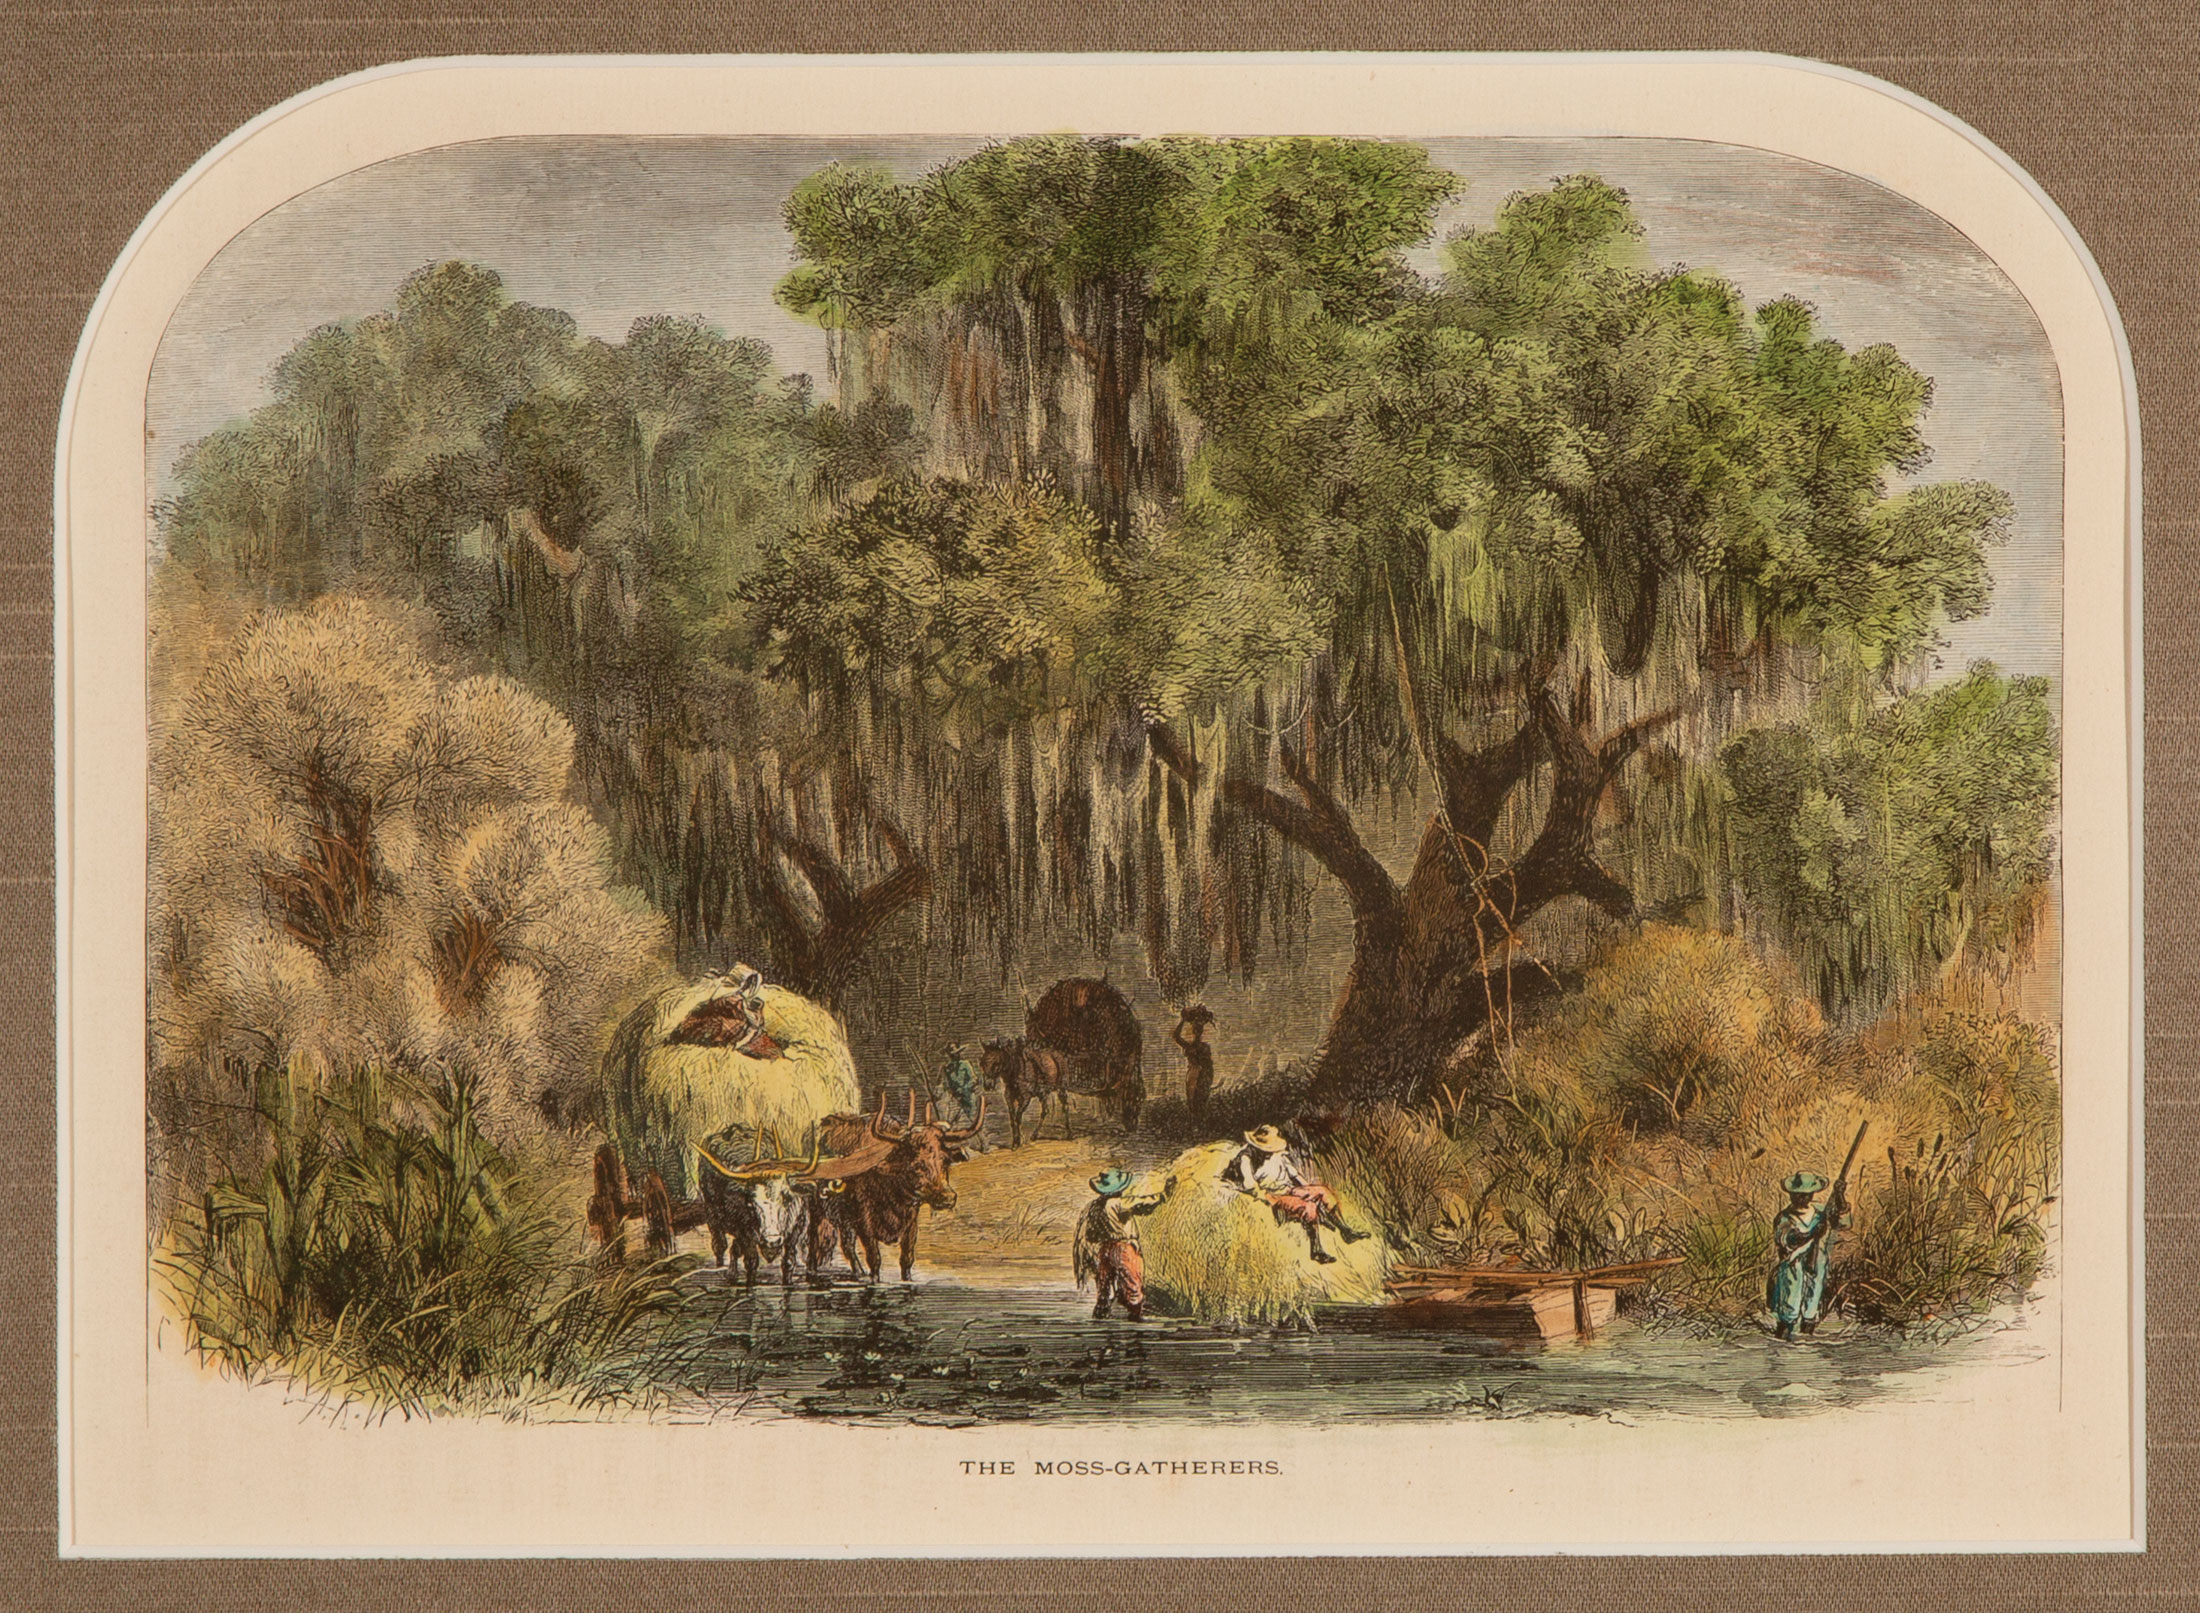 Alfred Rudolph Waud (American/New York, 1828-1891) , "The Moss-Gatherers", 1872-74, hand-colored - Image 2 of 2